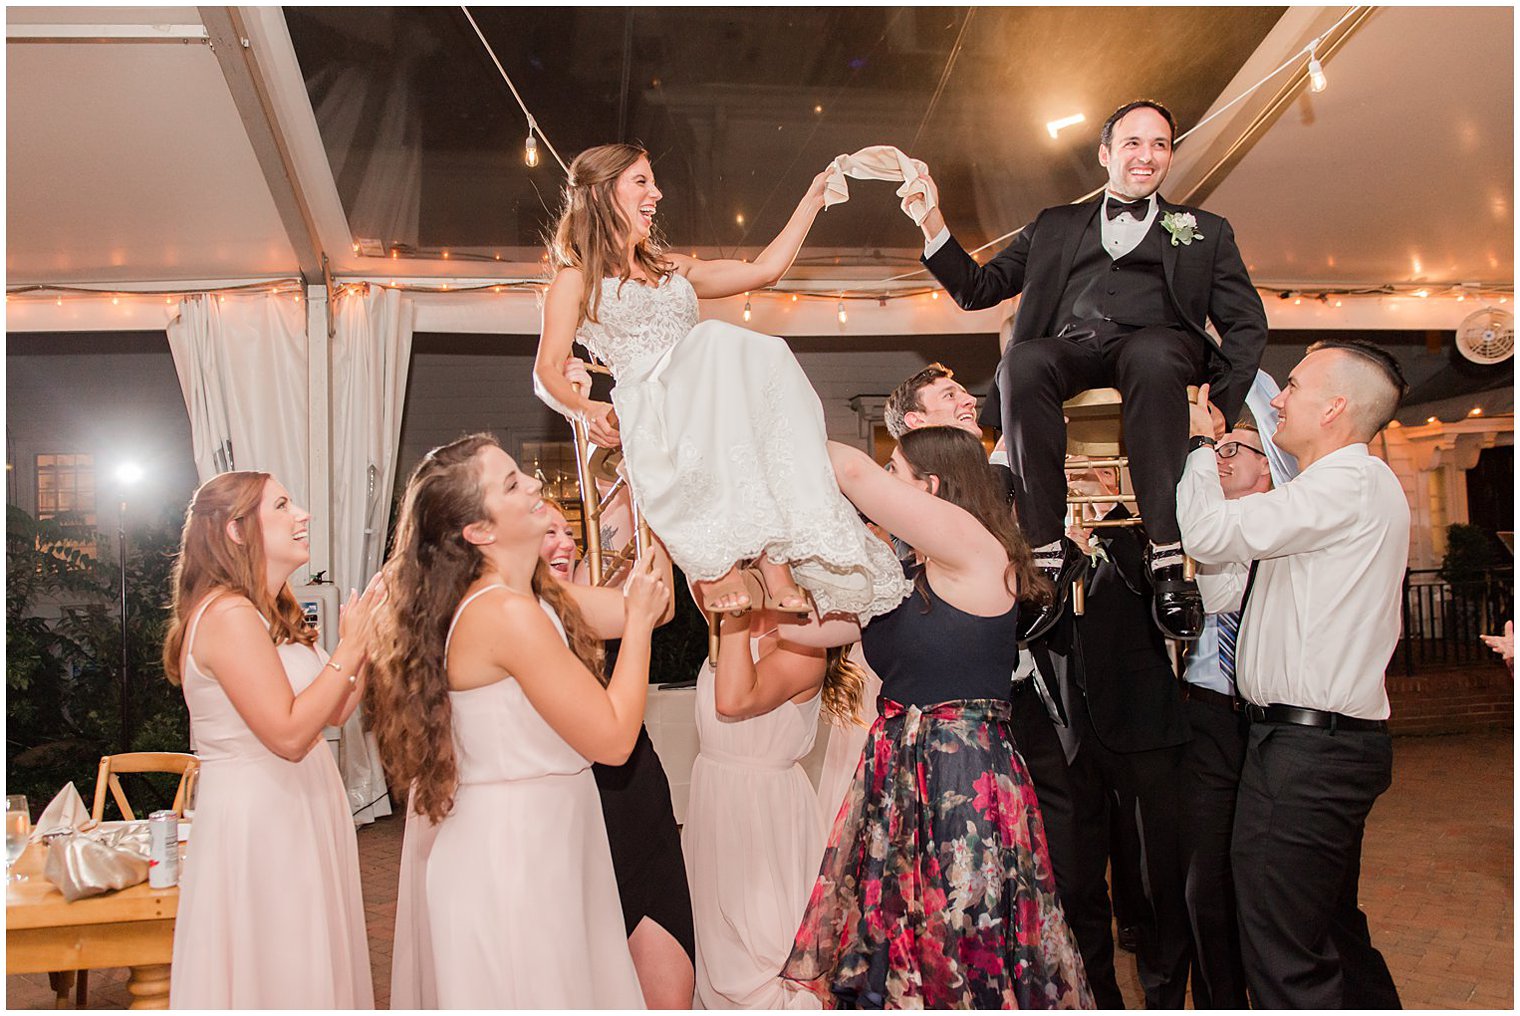 Hora for bride and groom during Chesterfield NJ wedding reception